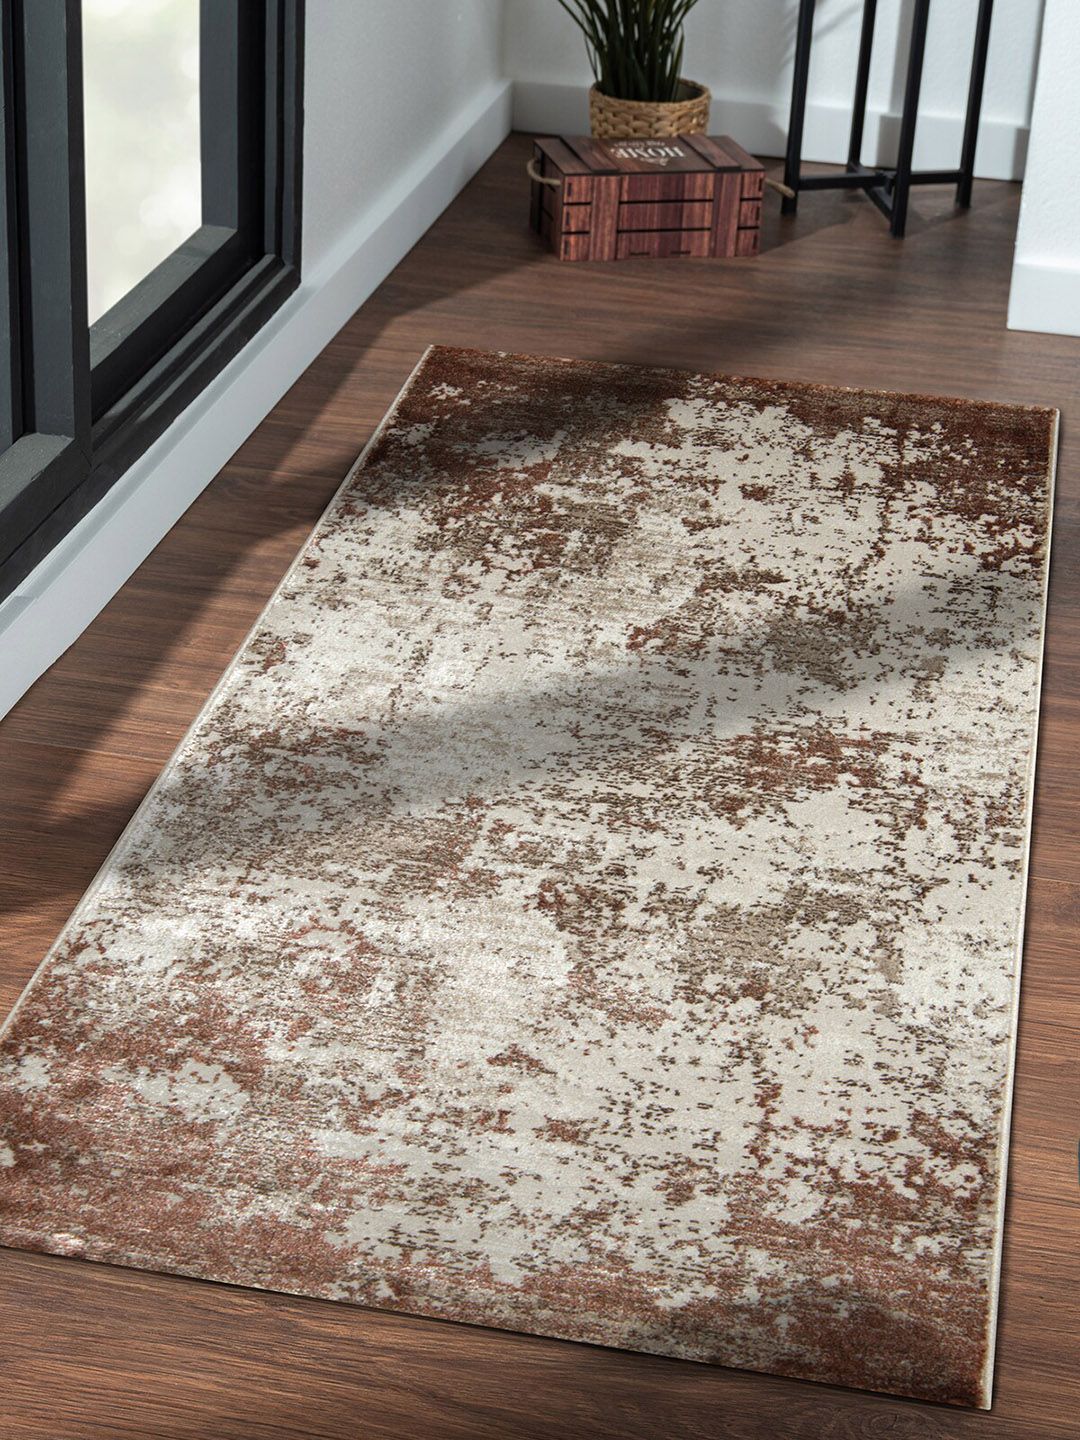 OBSESSIONS Brown & Beige Textured Anti-Bacterial Floor Runners Price in India